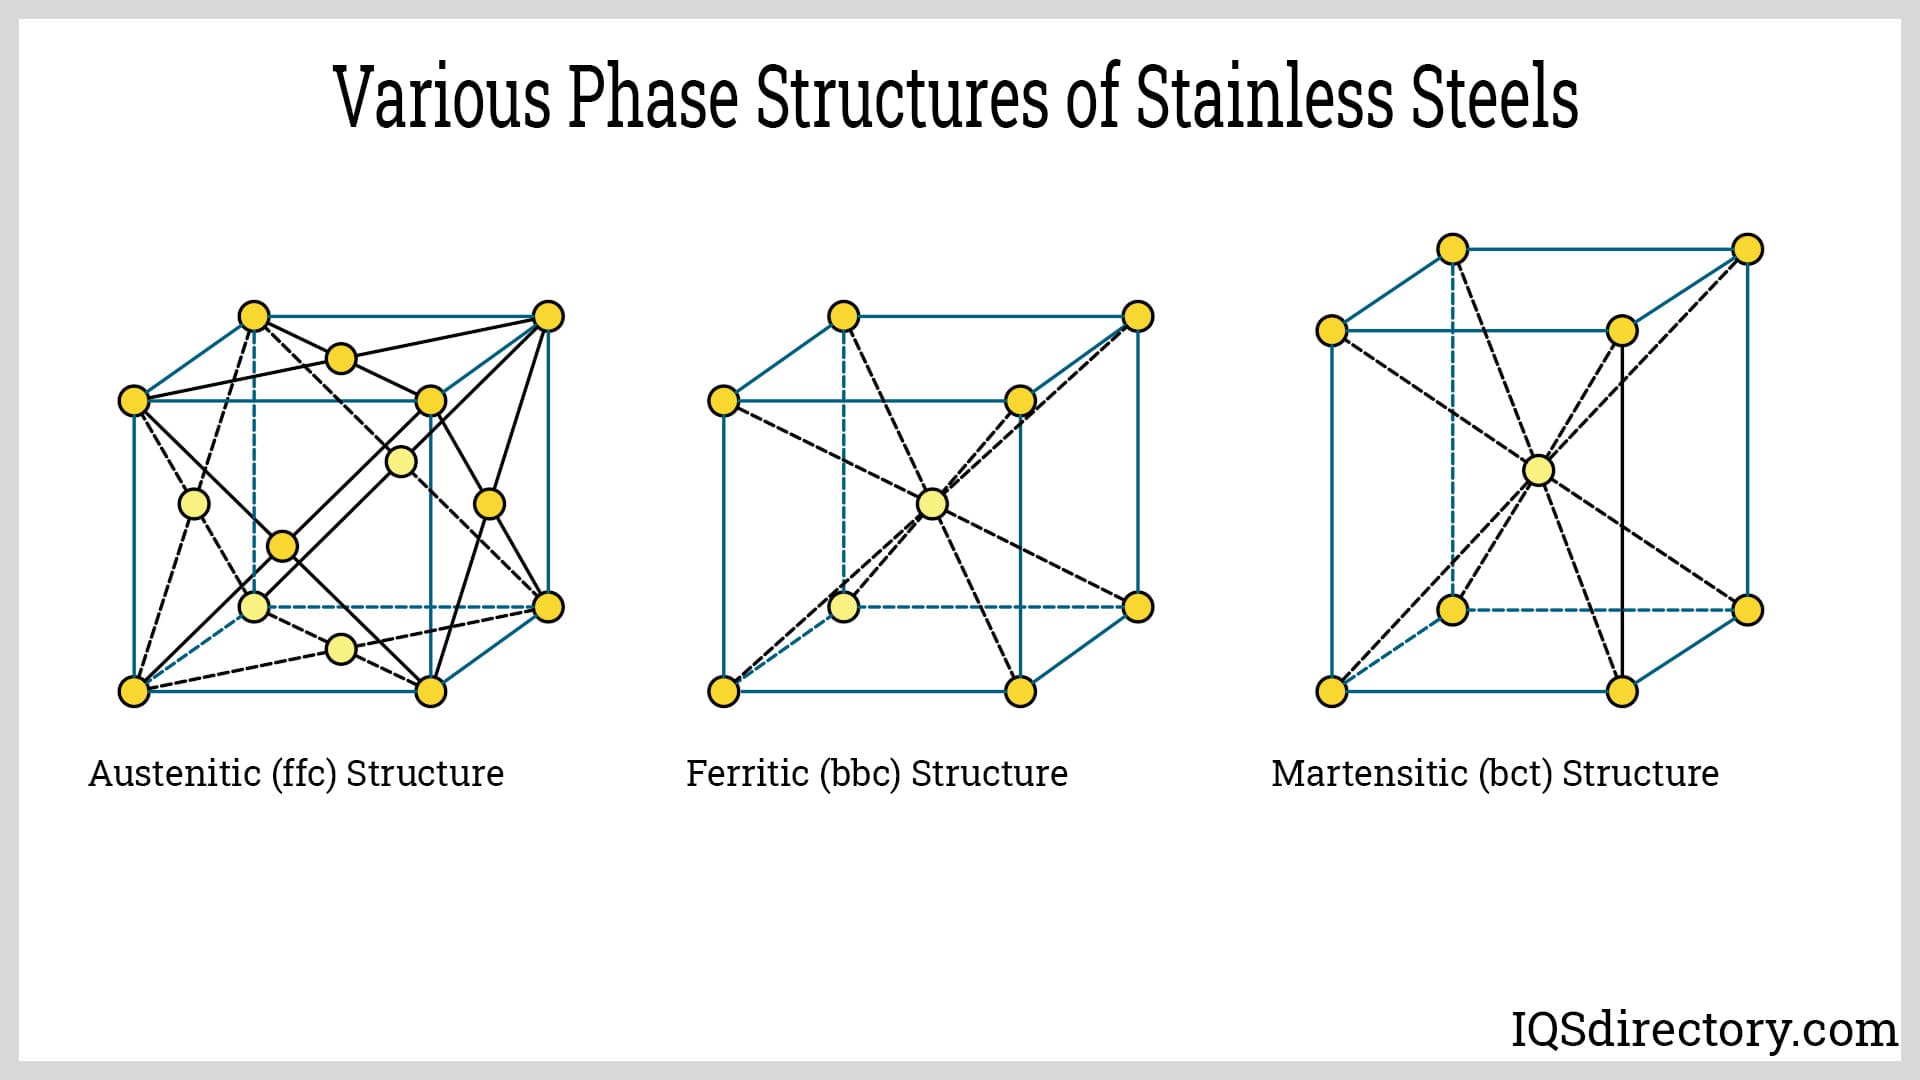 Various Phase Structures of Stainless Steels